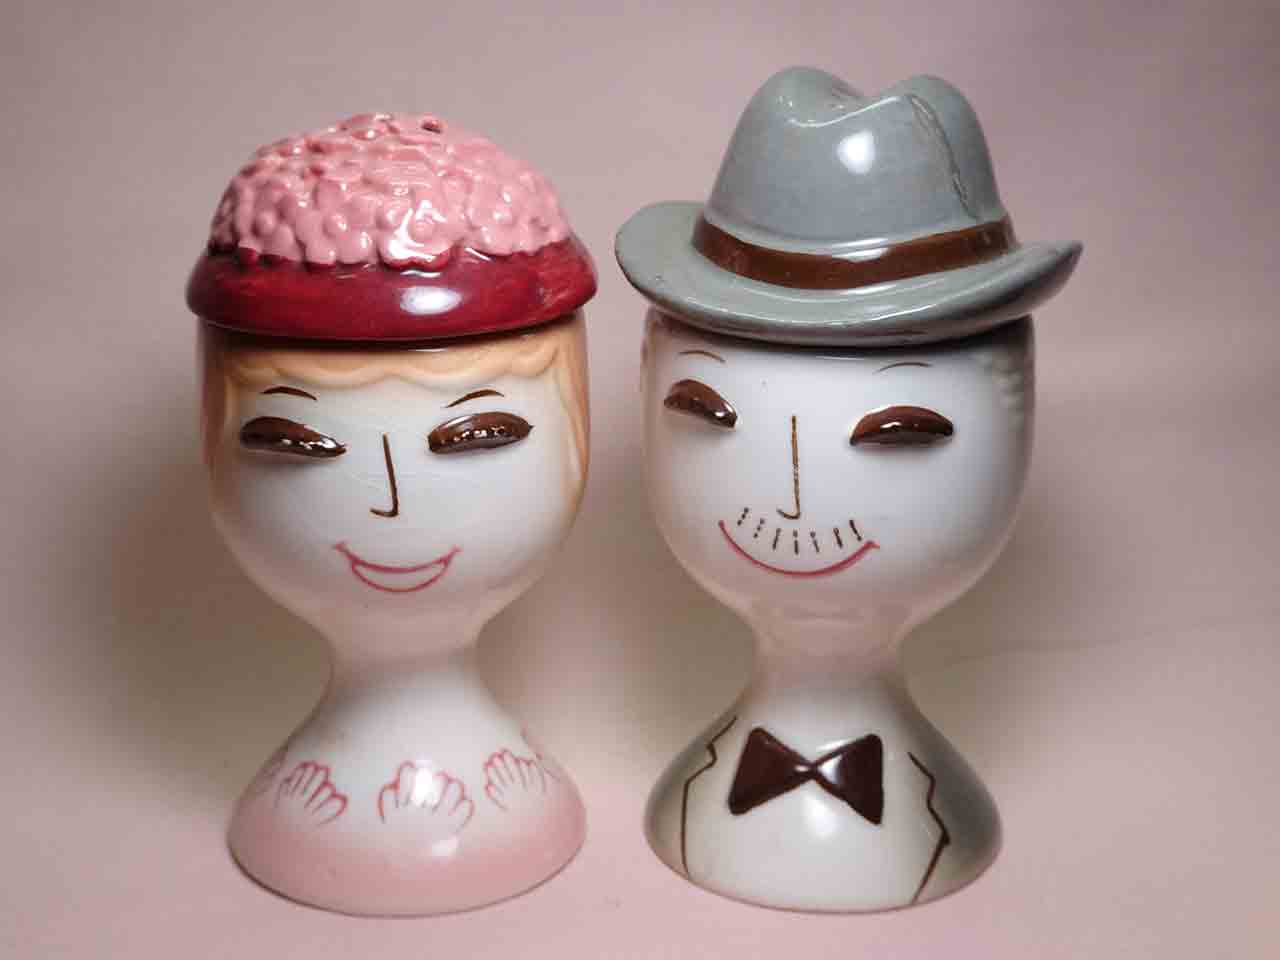 Egg cup people salt and pepper shakers